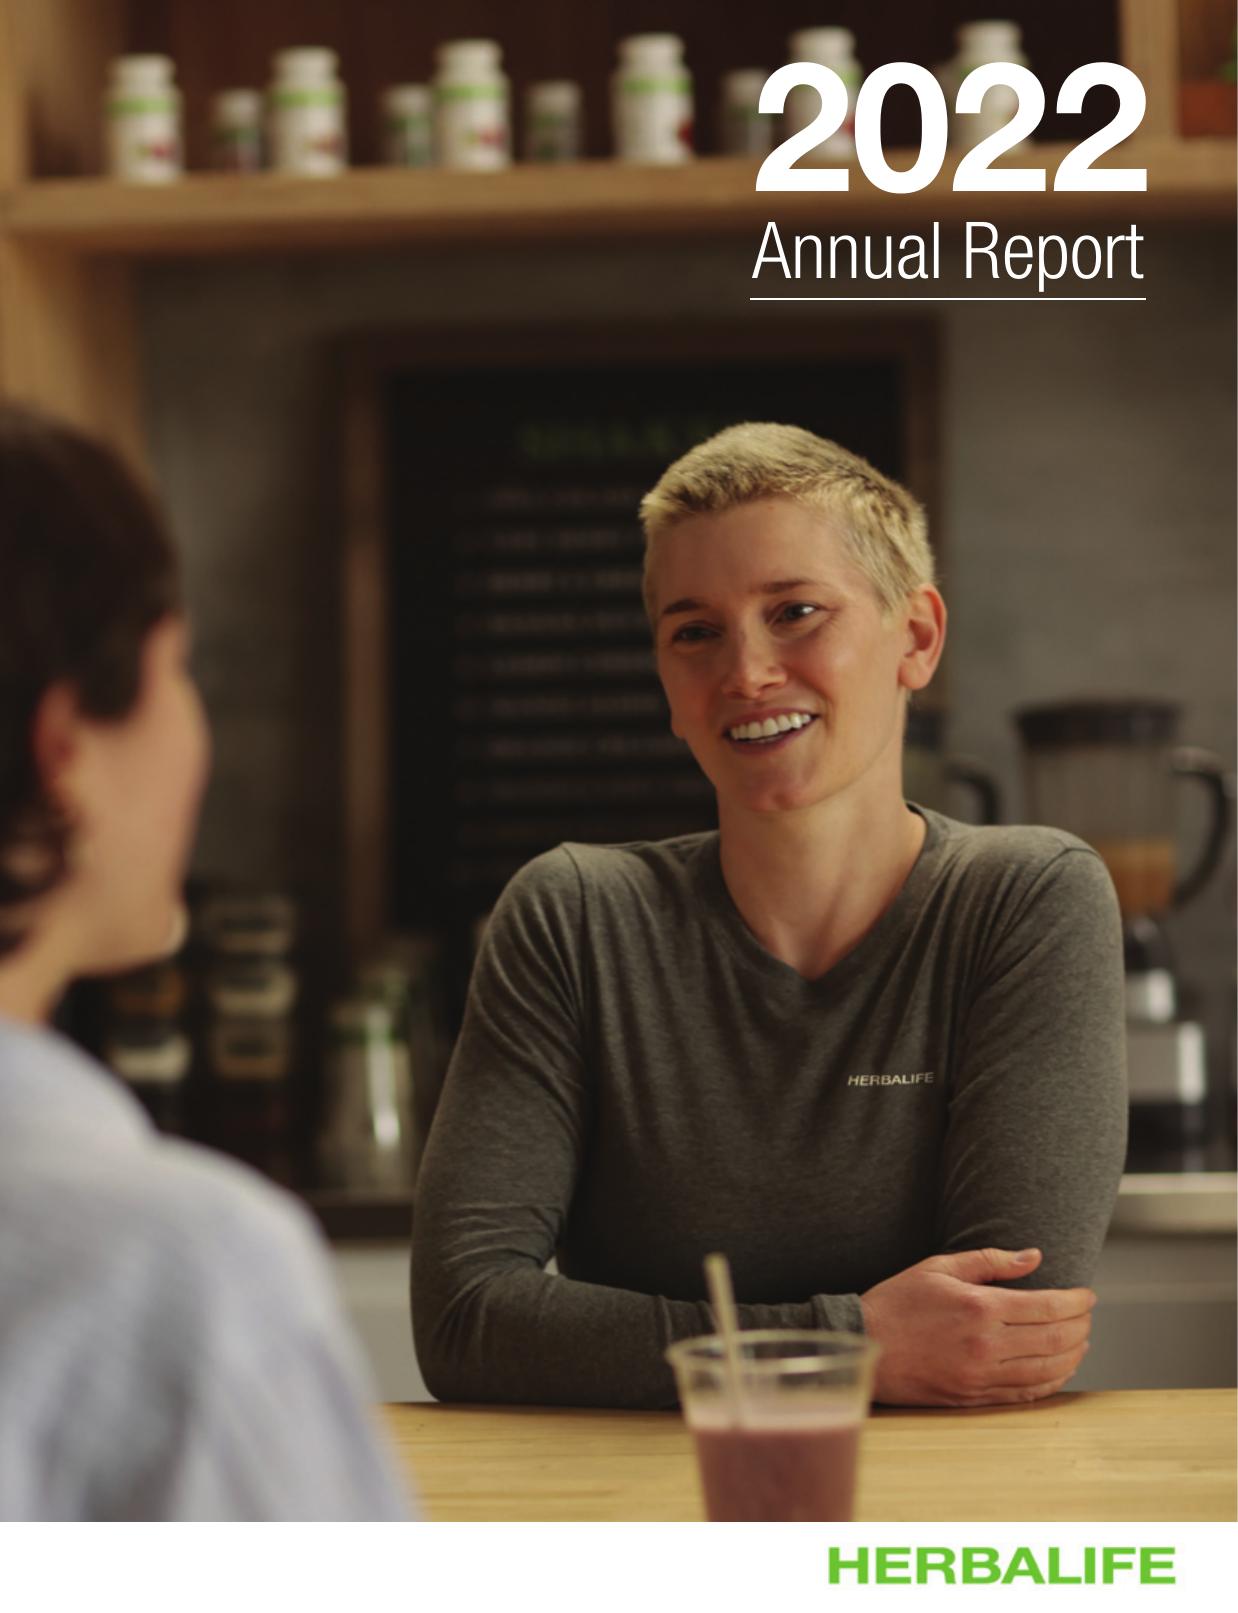 MEDTRONIC 2022 Annual Report